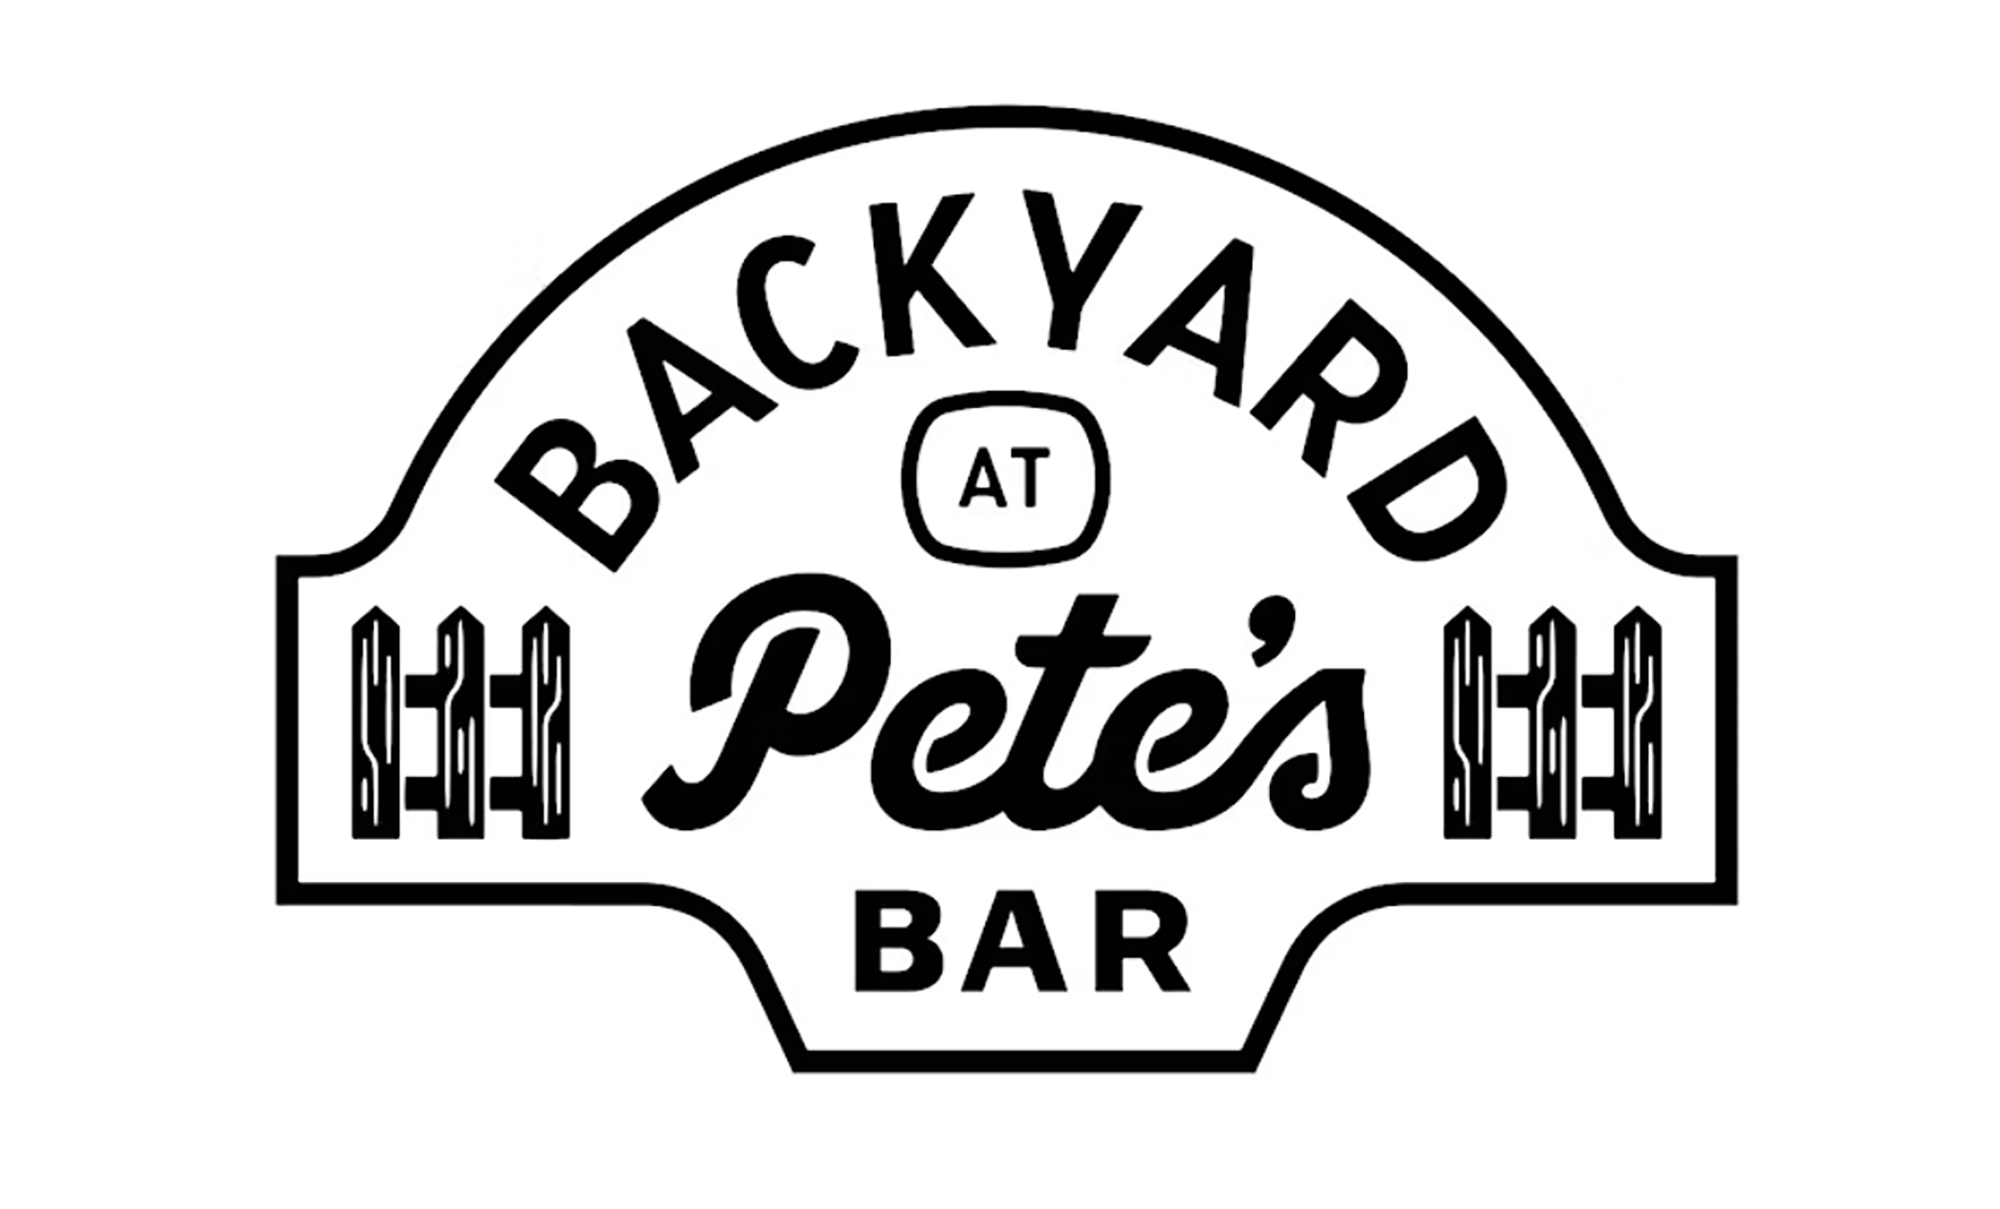 The logo for the Backyard at Pete's Bar.